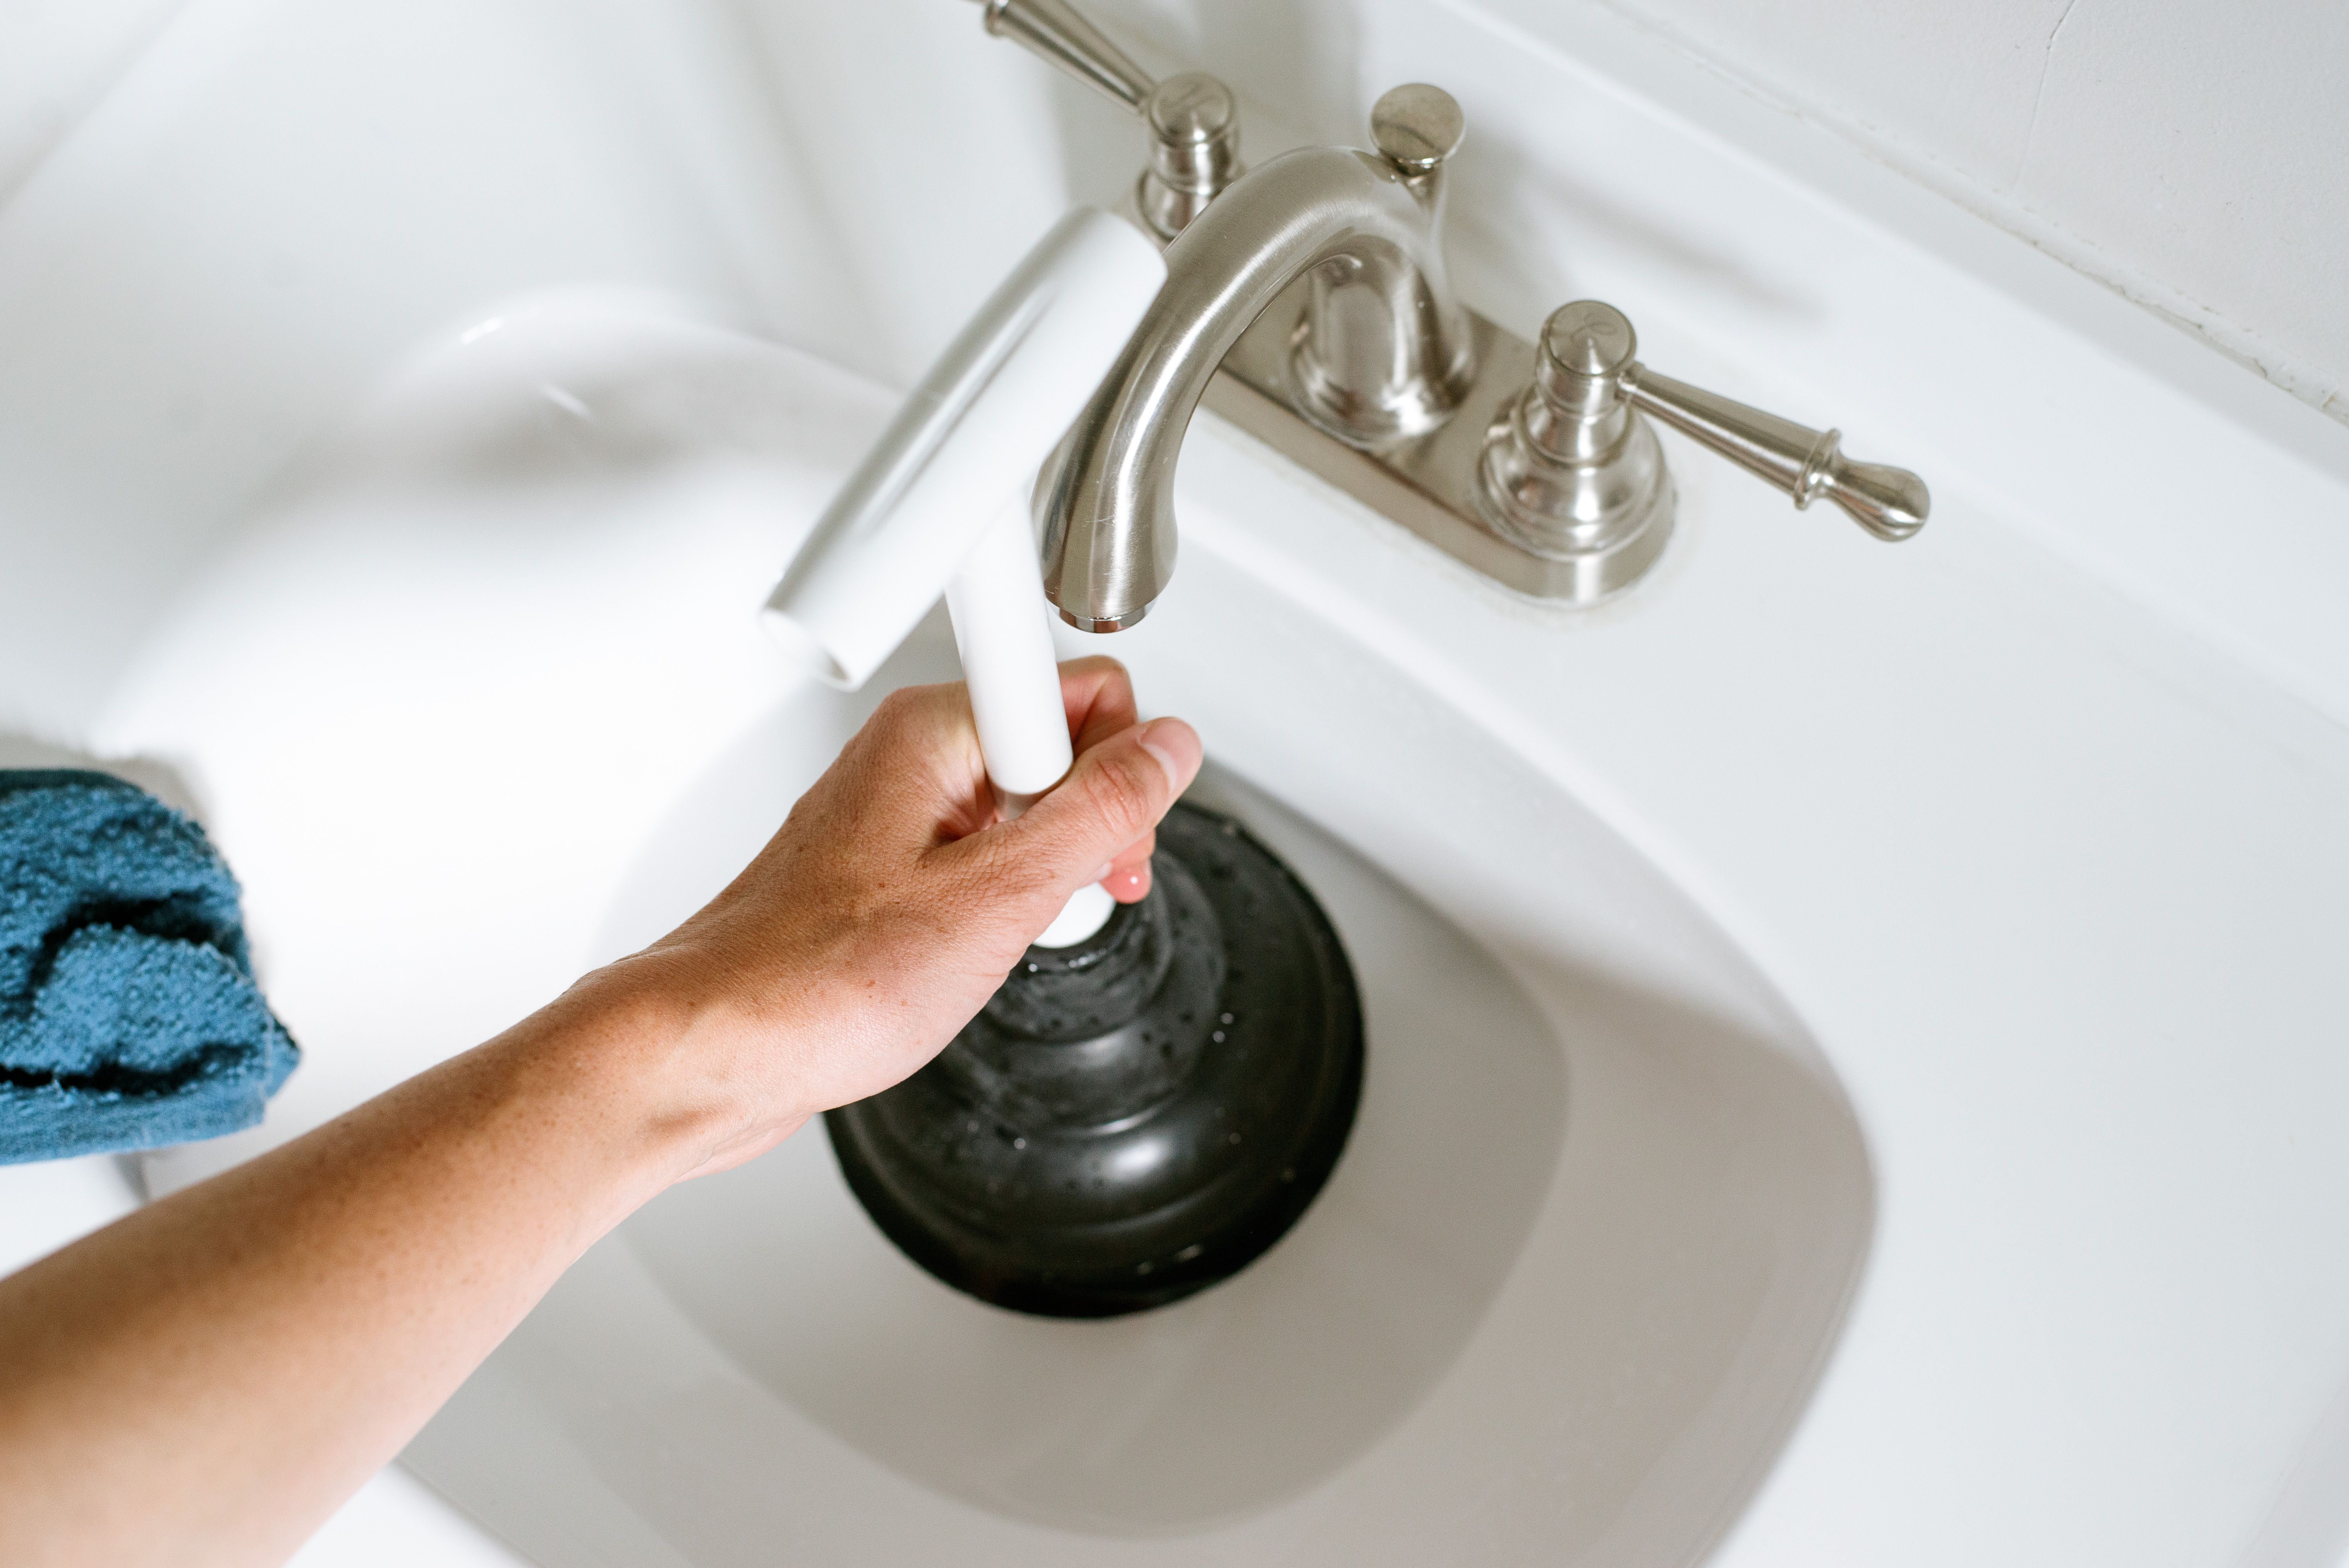 How to Unblock a Sink Drain With a Plunger